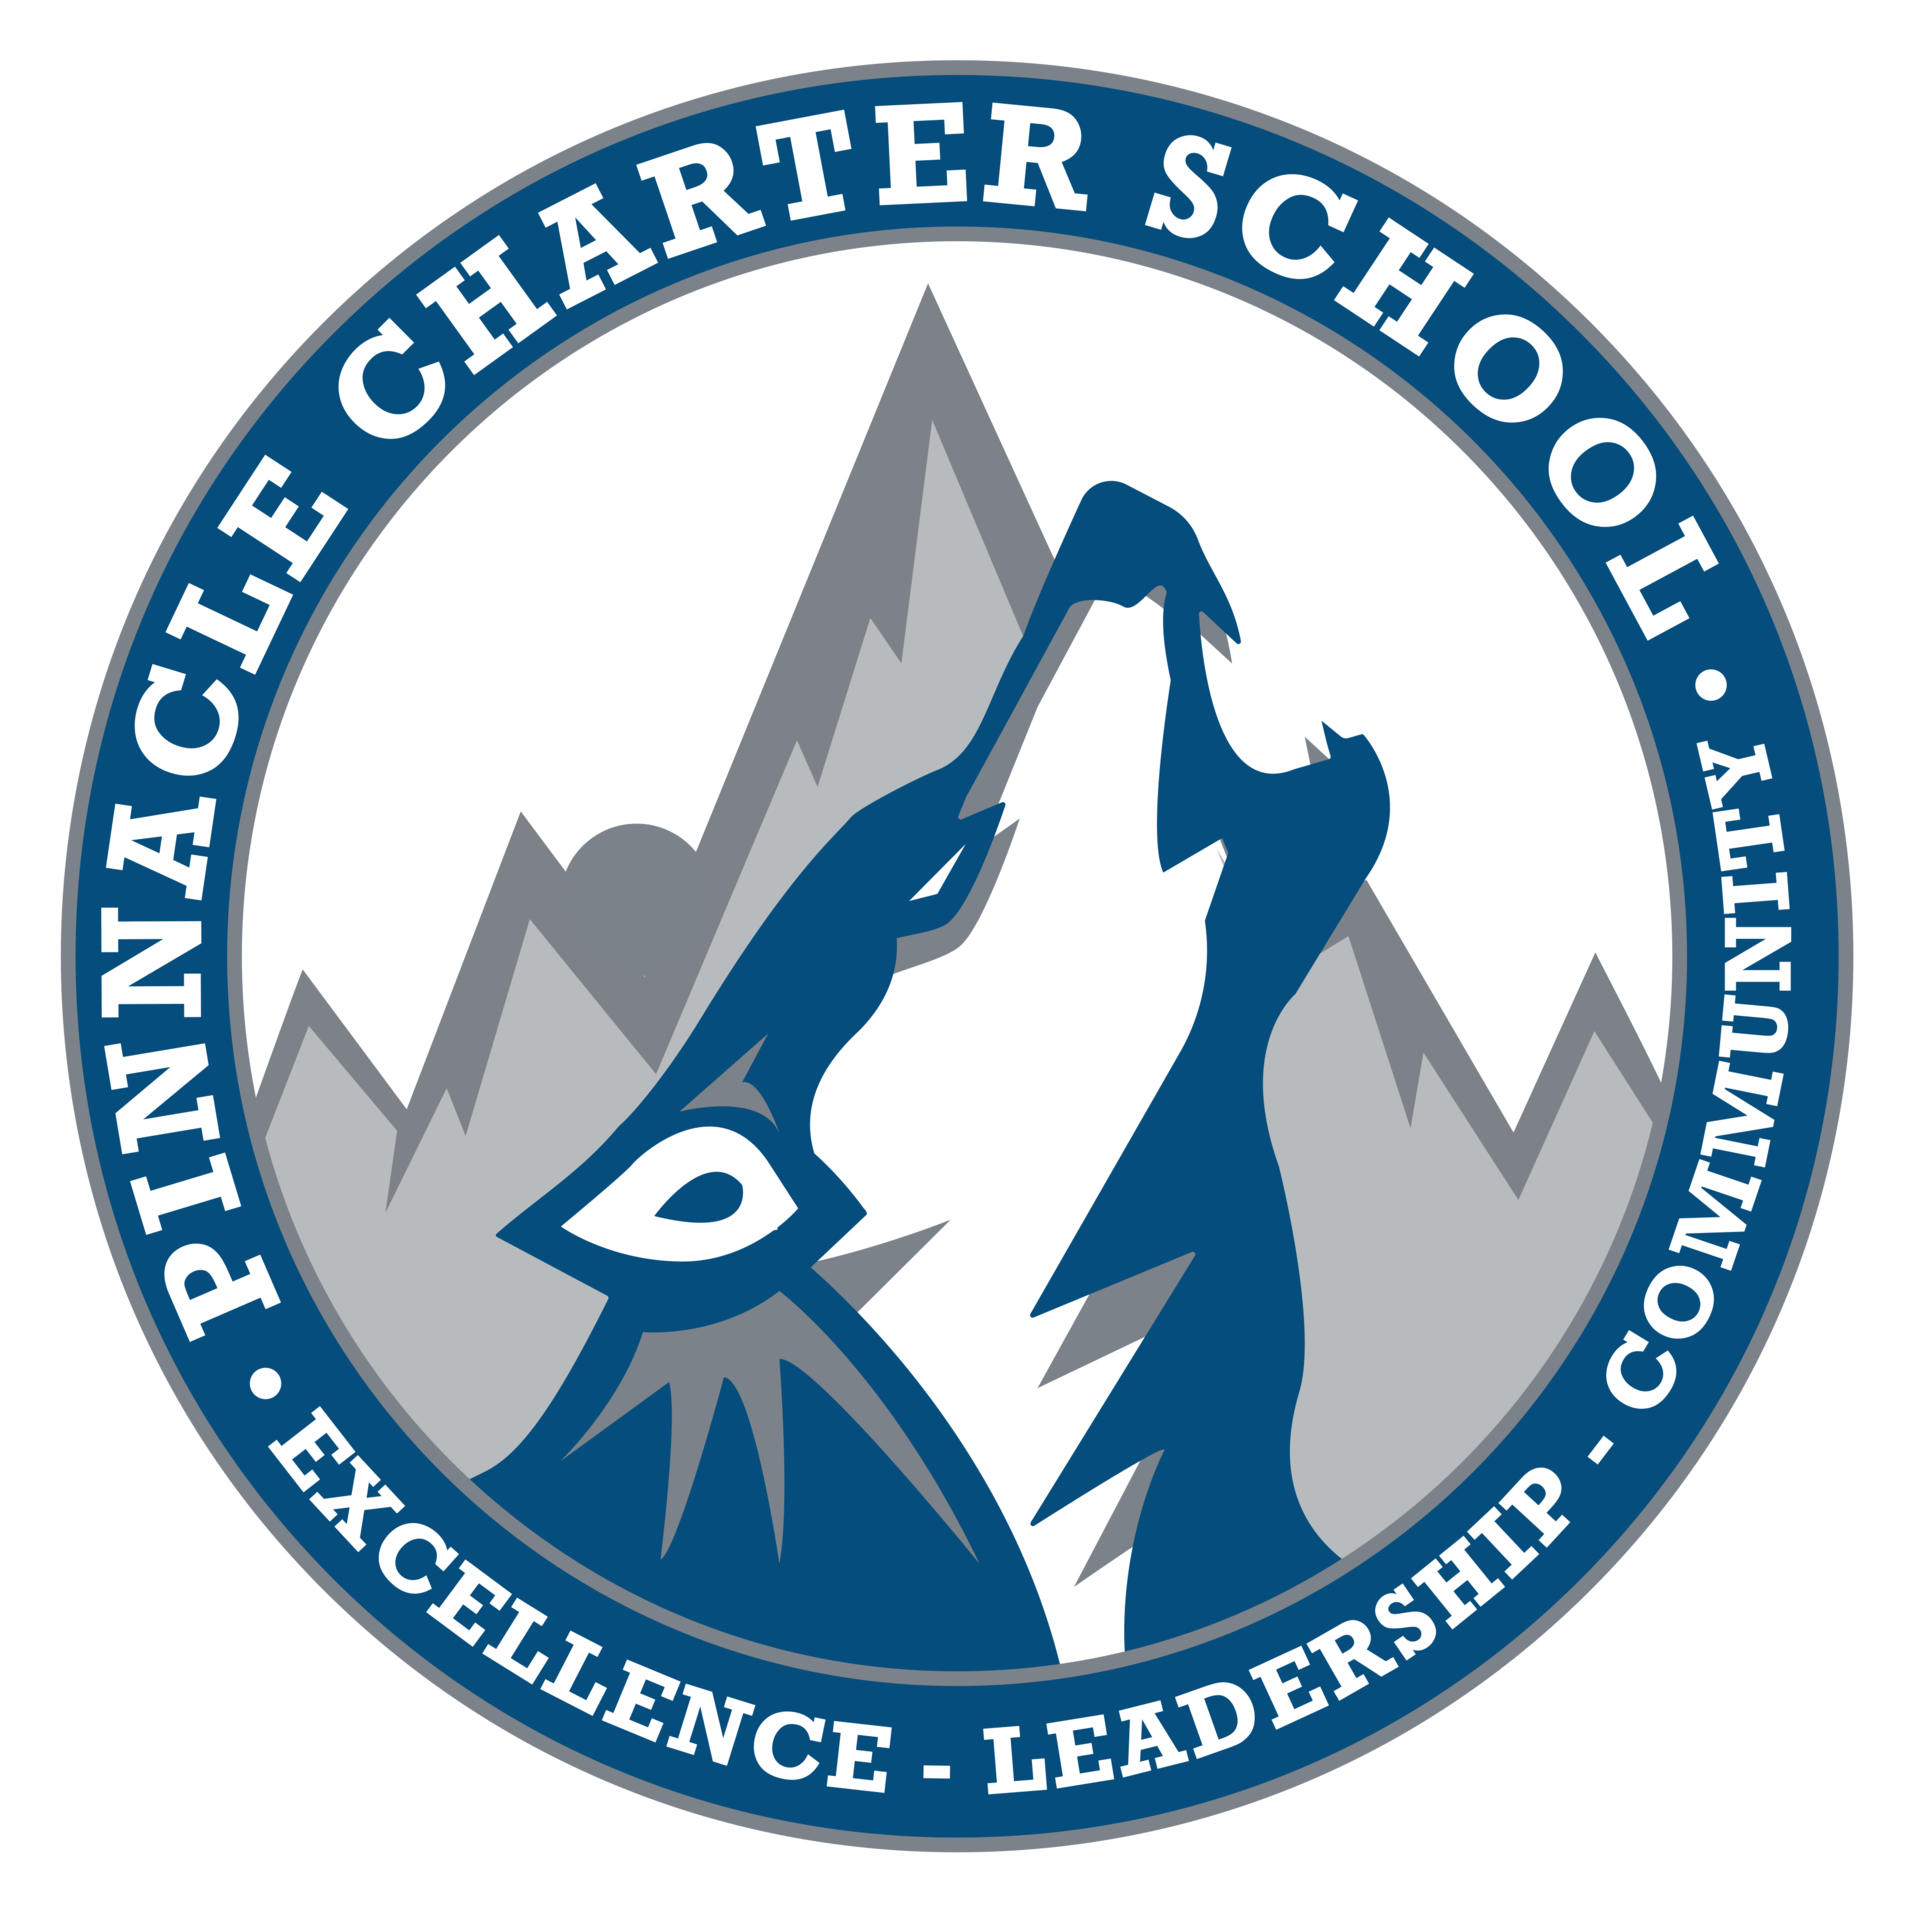 The logo for pinnacle charter school shows a wolf howling at the top of a mountain